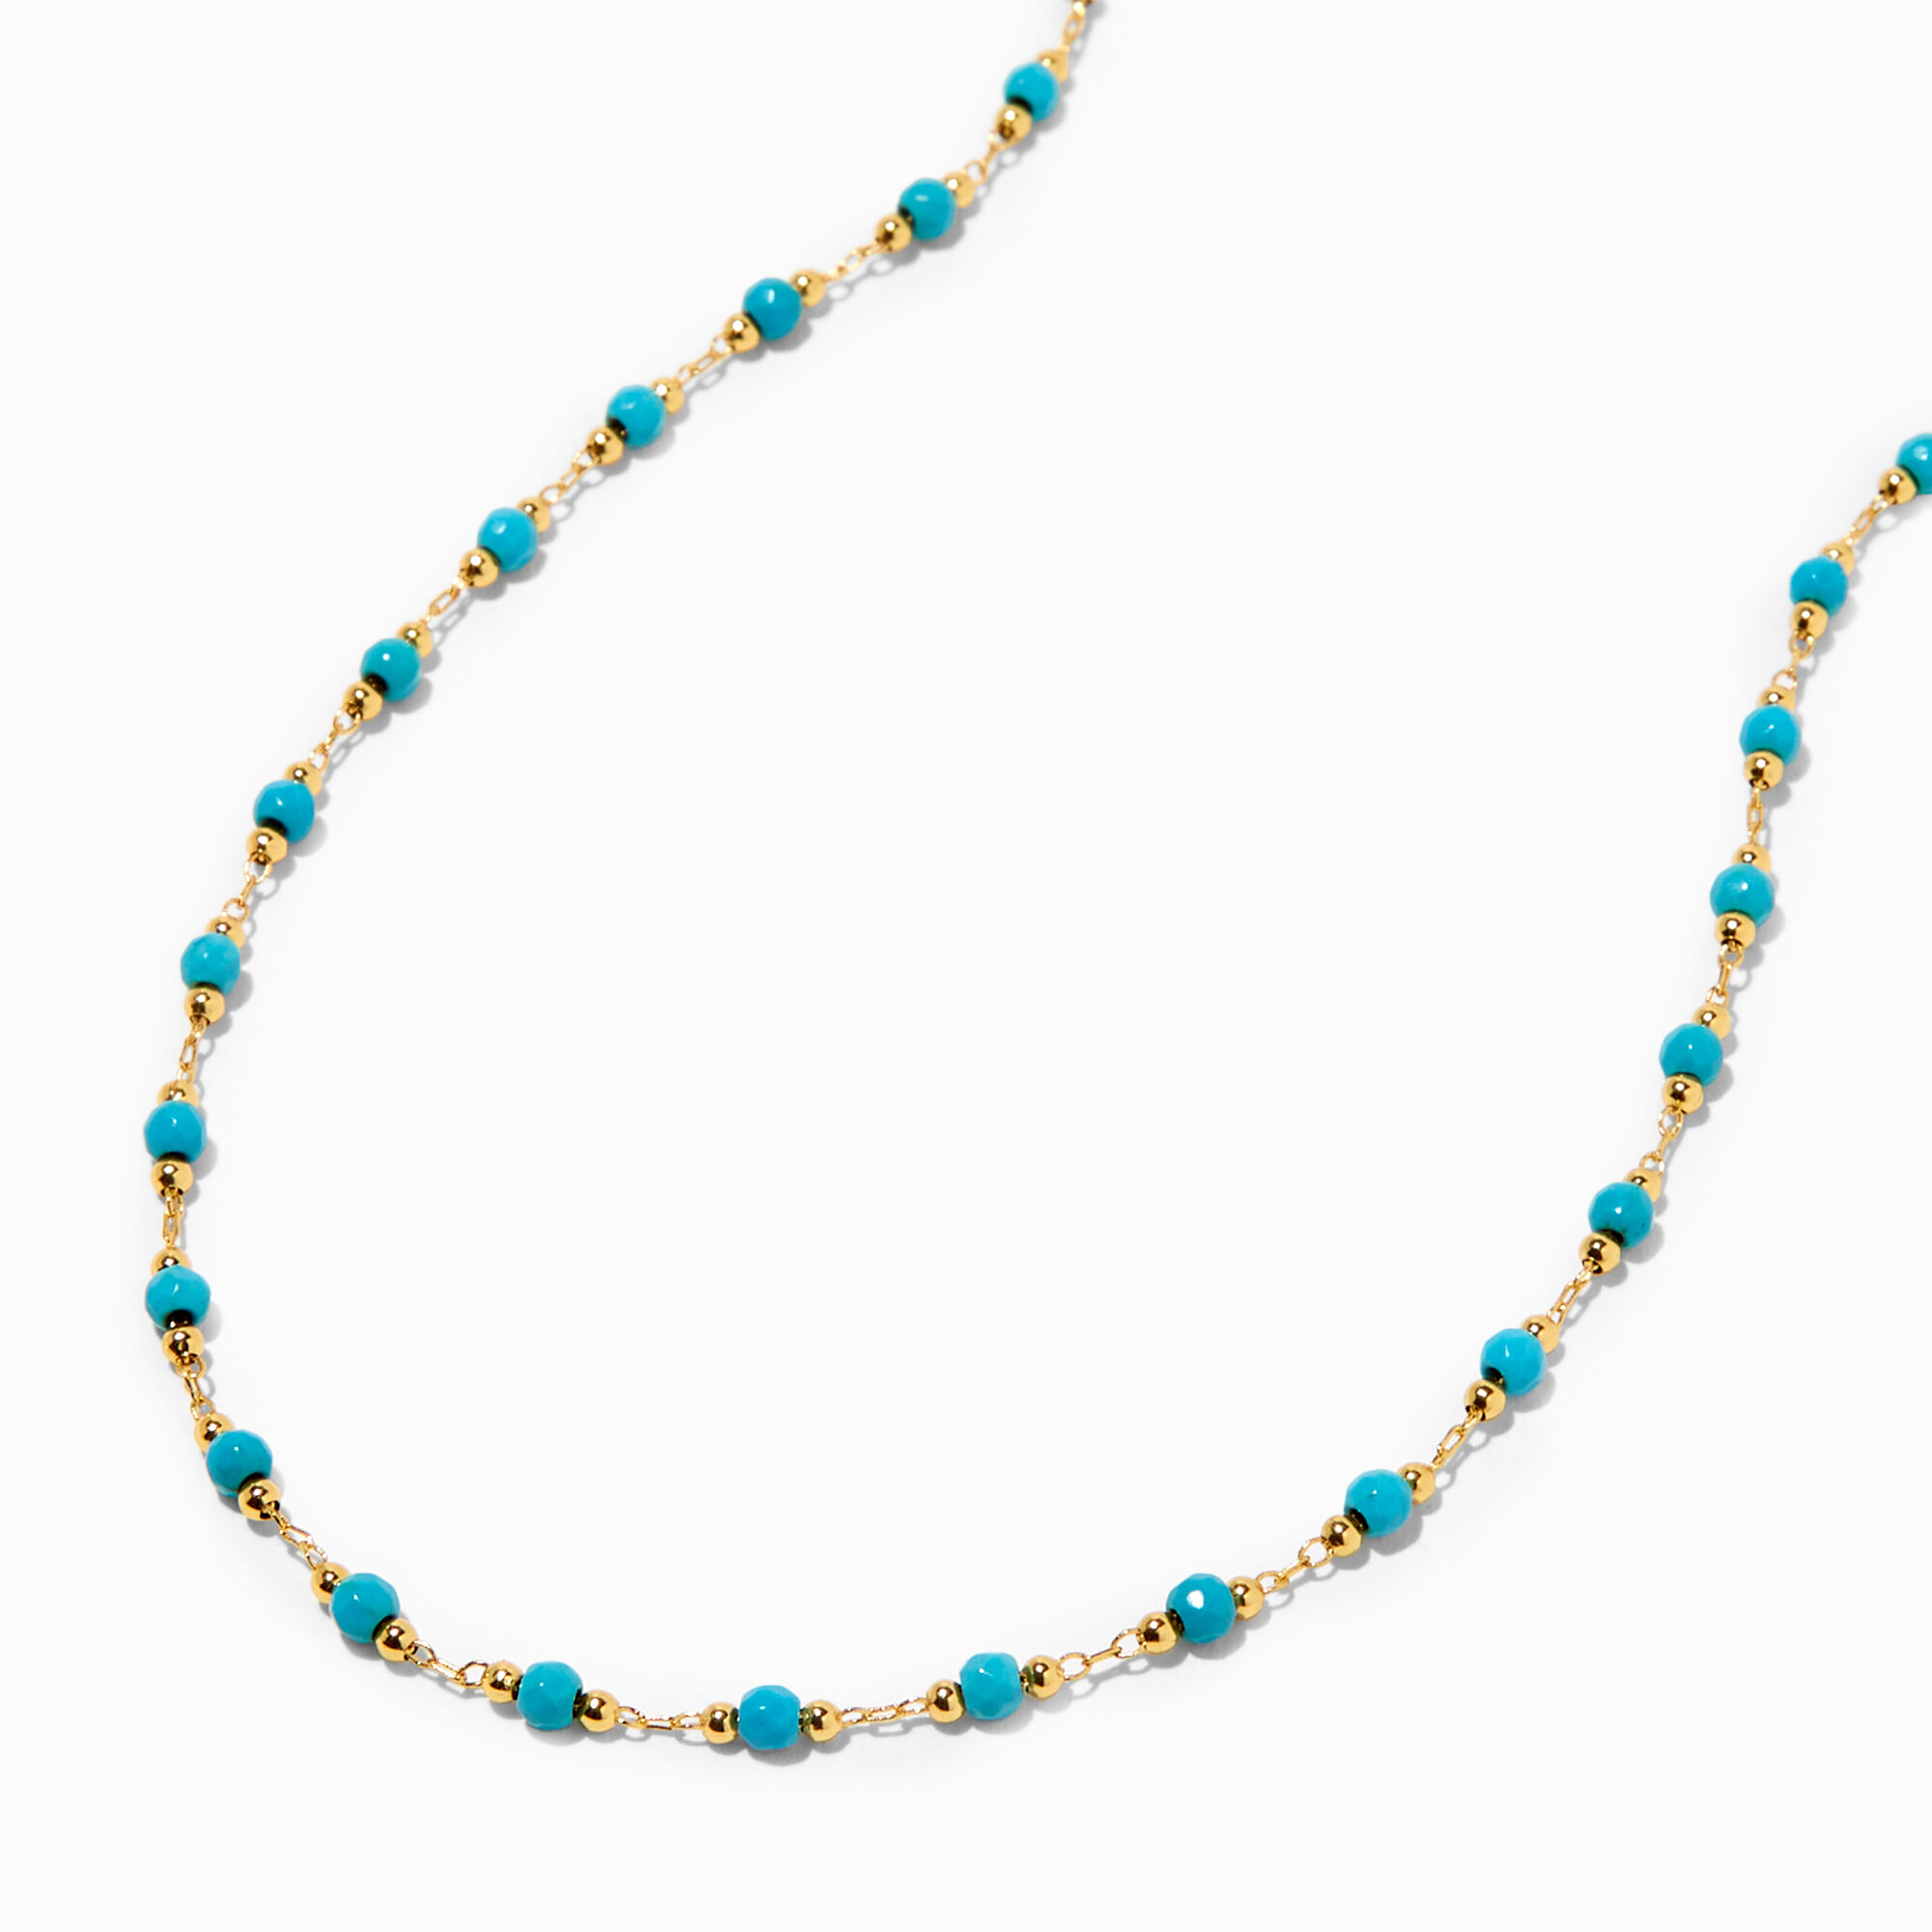 Buy 18K Gold Beaded Double Layers Necklace, Seed Bead Necklace, Dainty  Laying Necklace, Beaded Necklace, Colorful Minimalist Jewelry Online in  India - Etsy